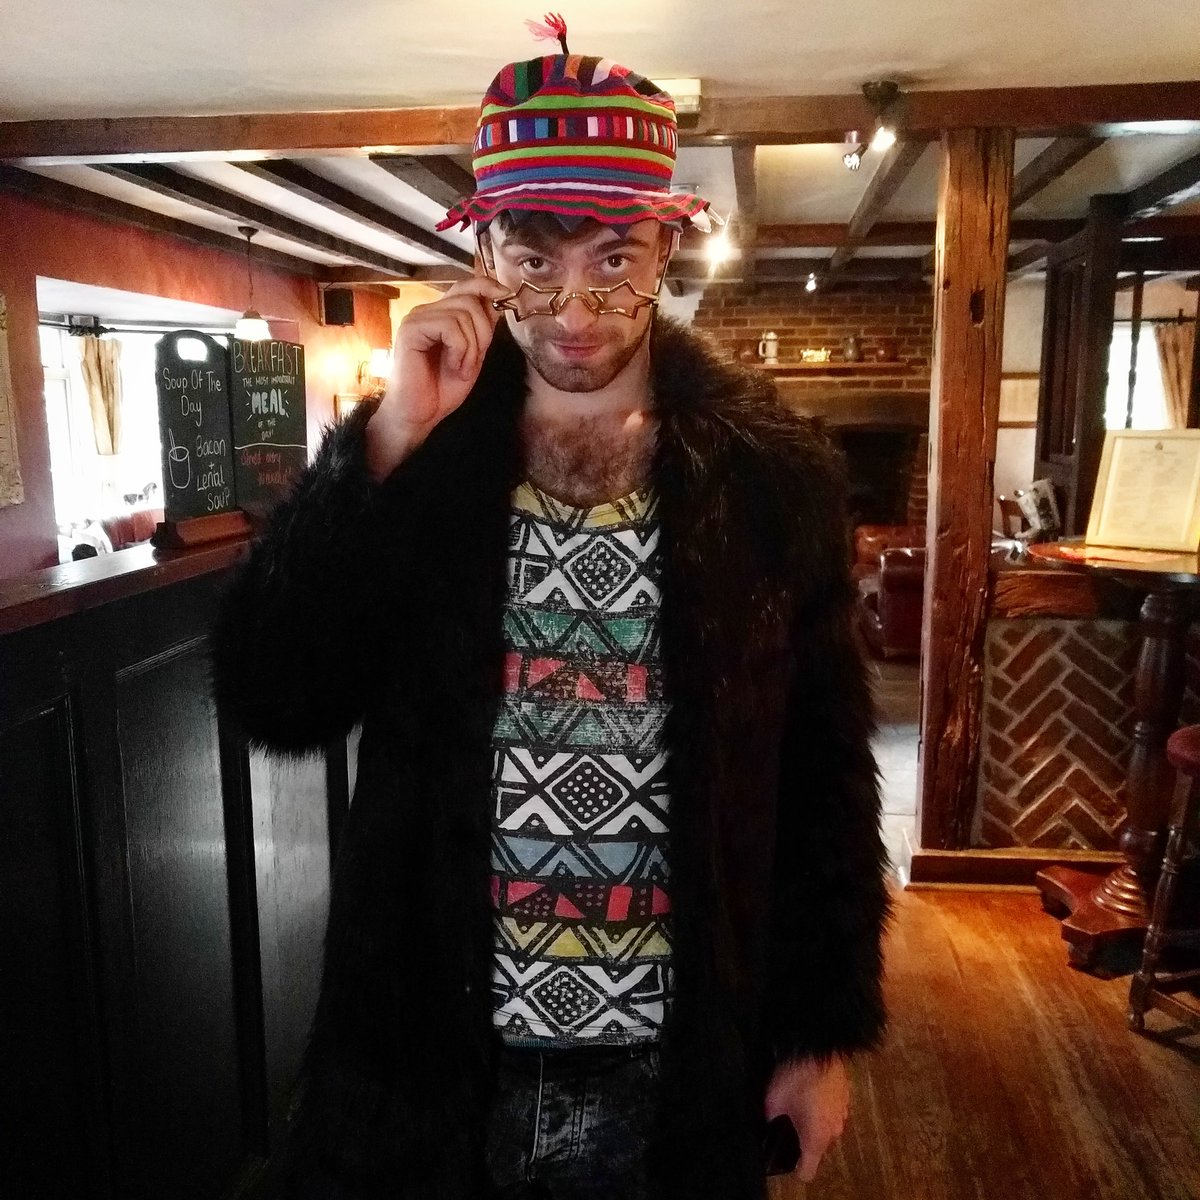 #quizmastertom is ready for tonight's pub quiz, are you?! Book your table now before they all go! #quiznight #quiz #friendswhoplaytogetherstaytogether